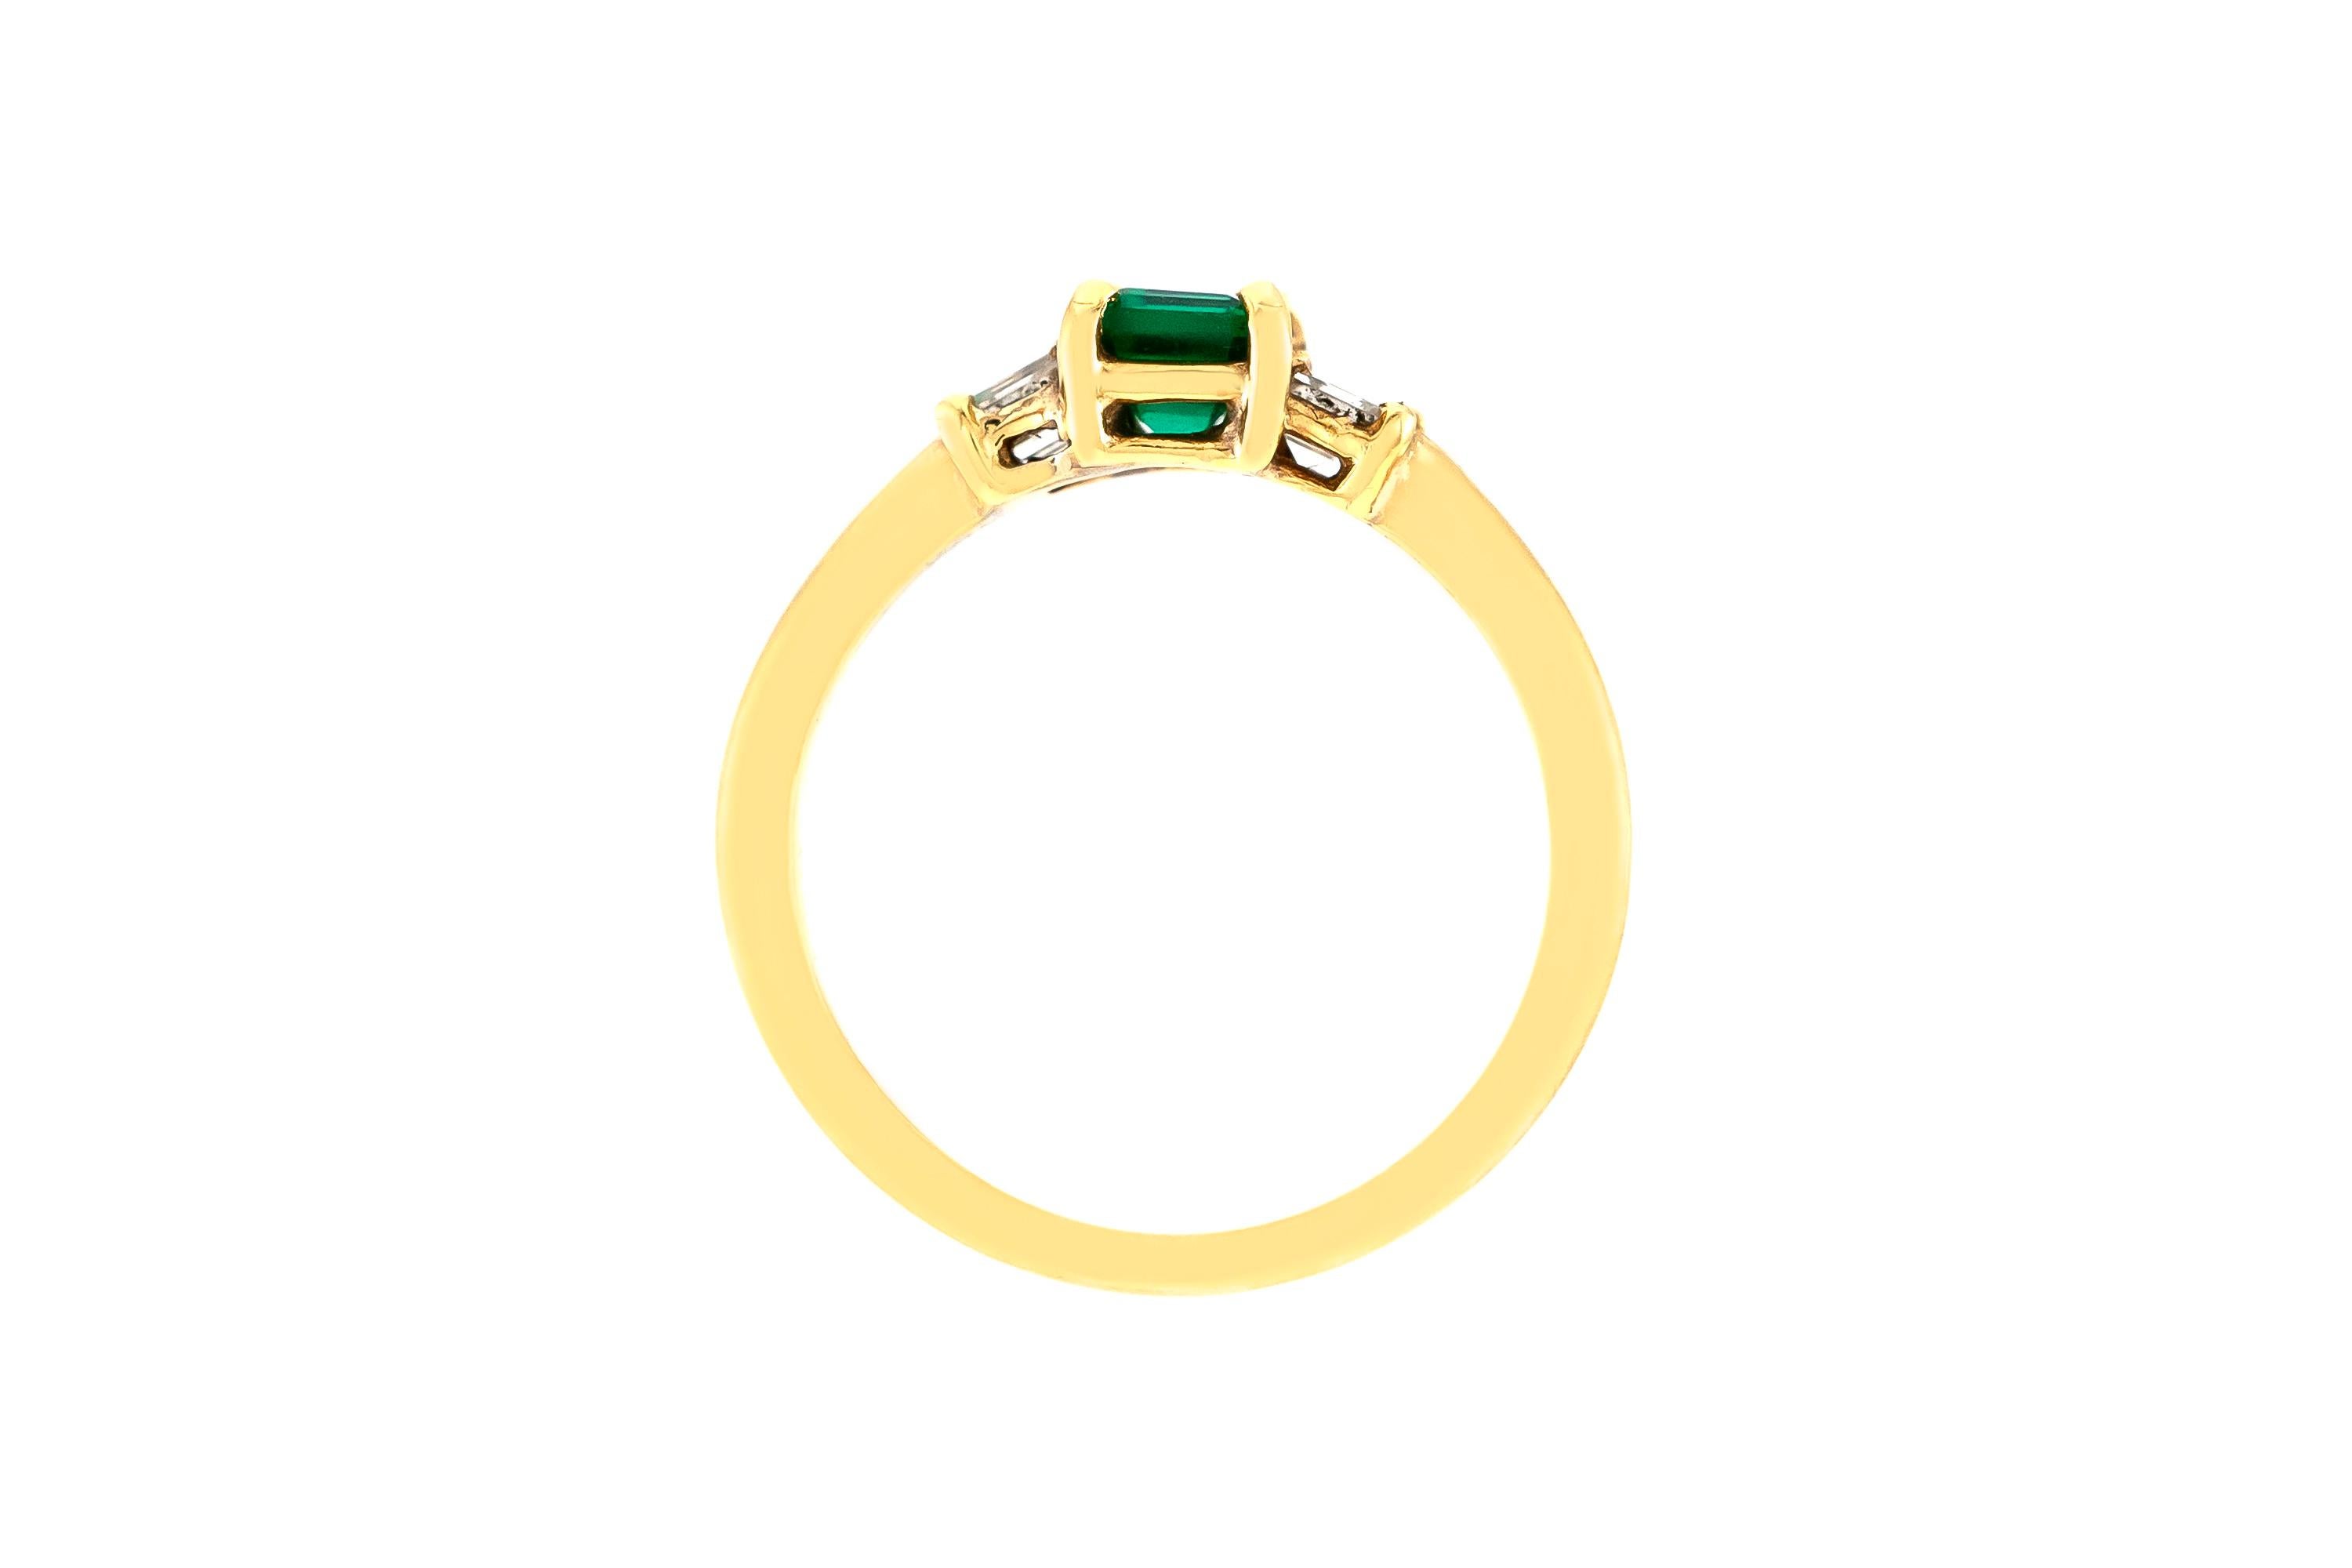 The ring is finely crafted in 18k yellow gold with center emerald weighing approximately total of 0.45 carat and diamonds weighing approximately total of 0.27 carat.
Circa 1970.